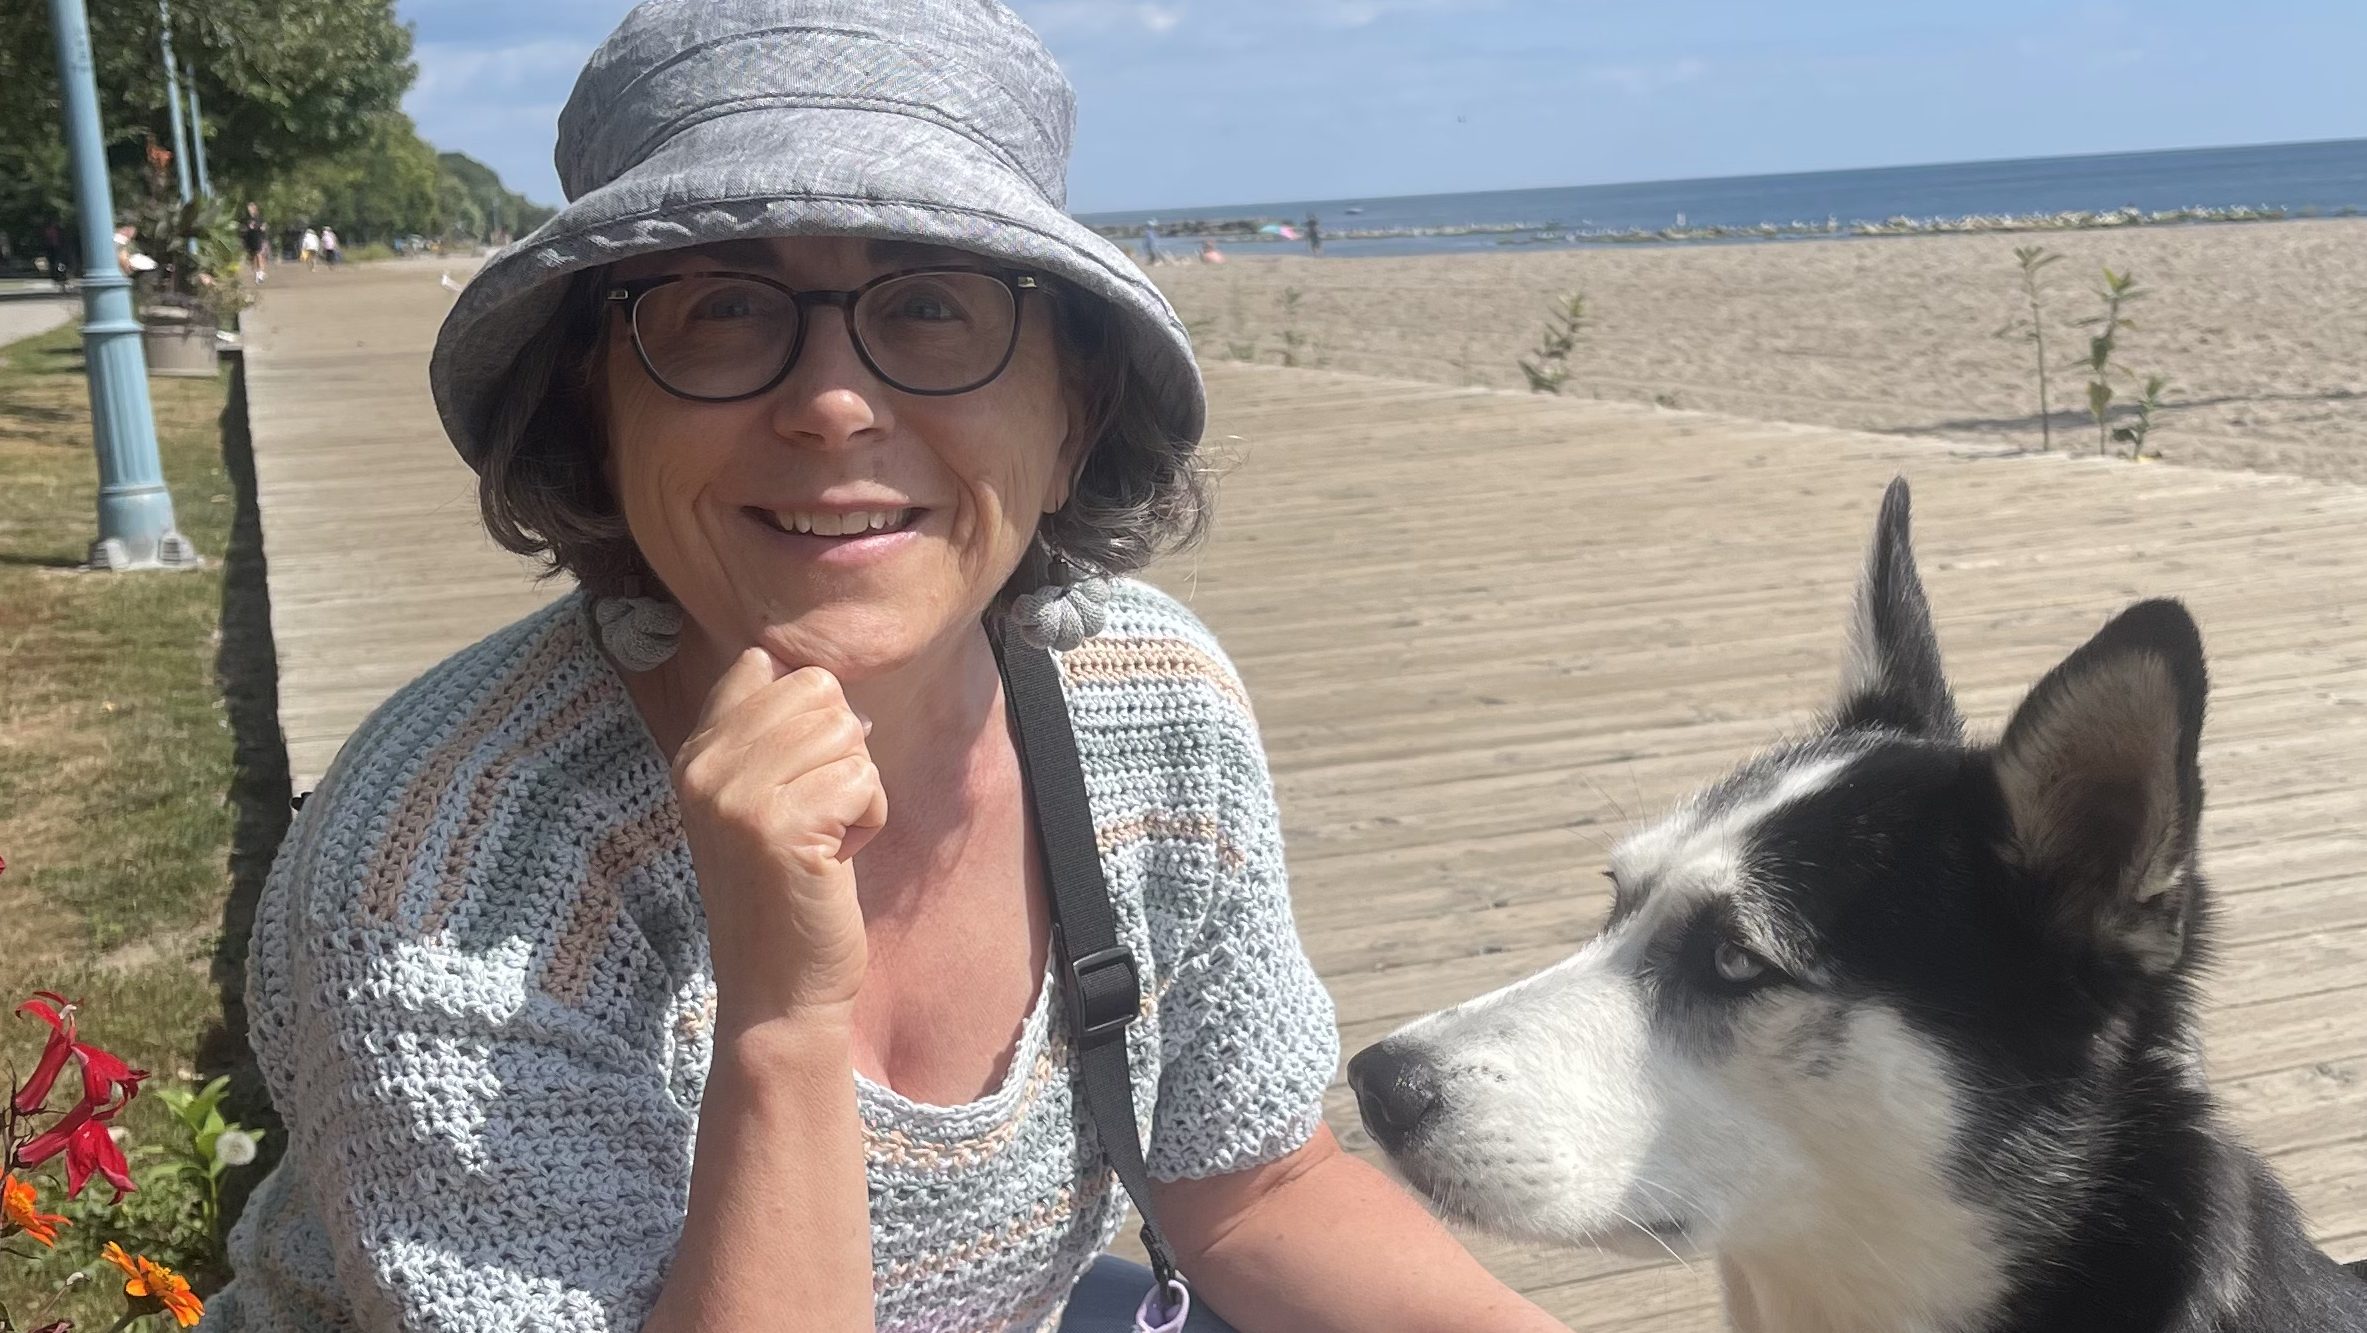 I am crouched down next to a husky and smiling. We are on the boardwalk and the beach is behind me. I am wearing a sunhat, glasses and a blue crocheted top.